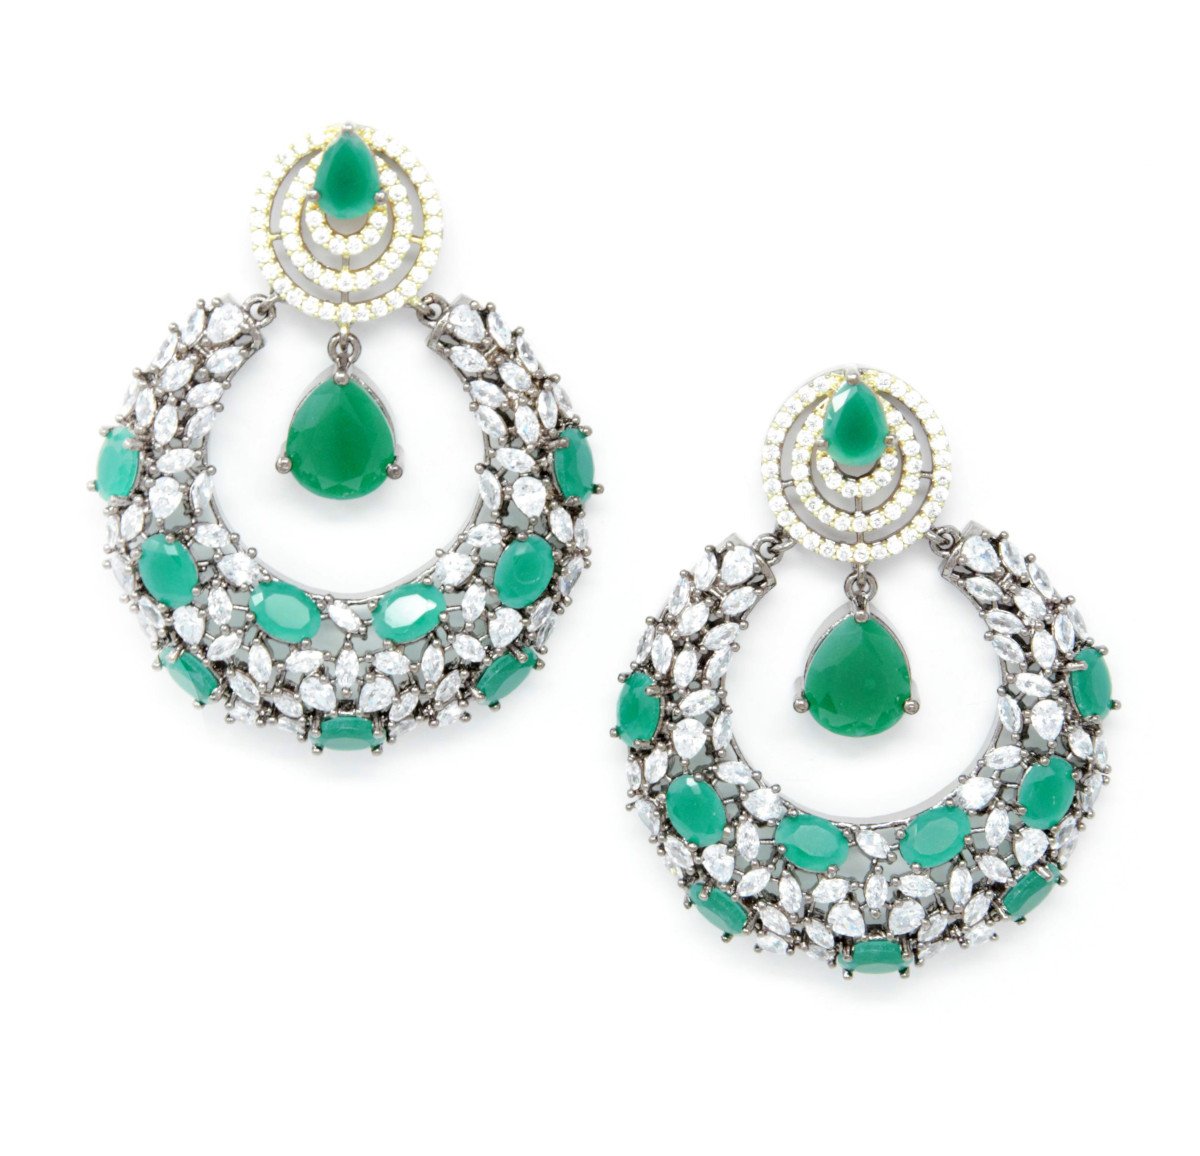 Victorian Style Chandbali Earrings With Green Color Stone Drops